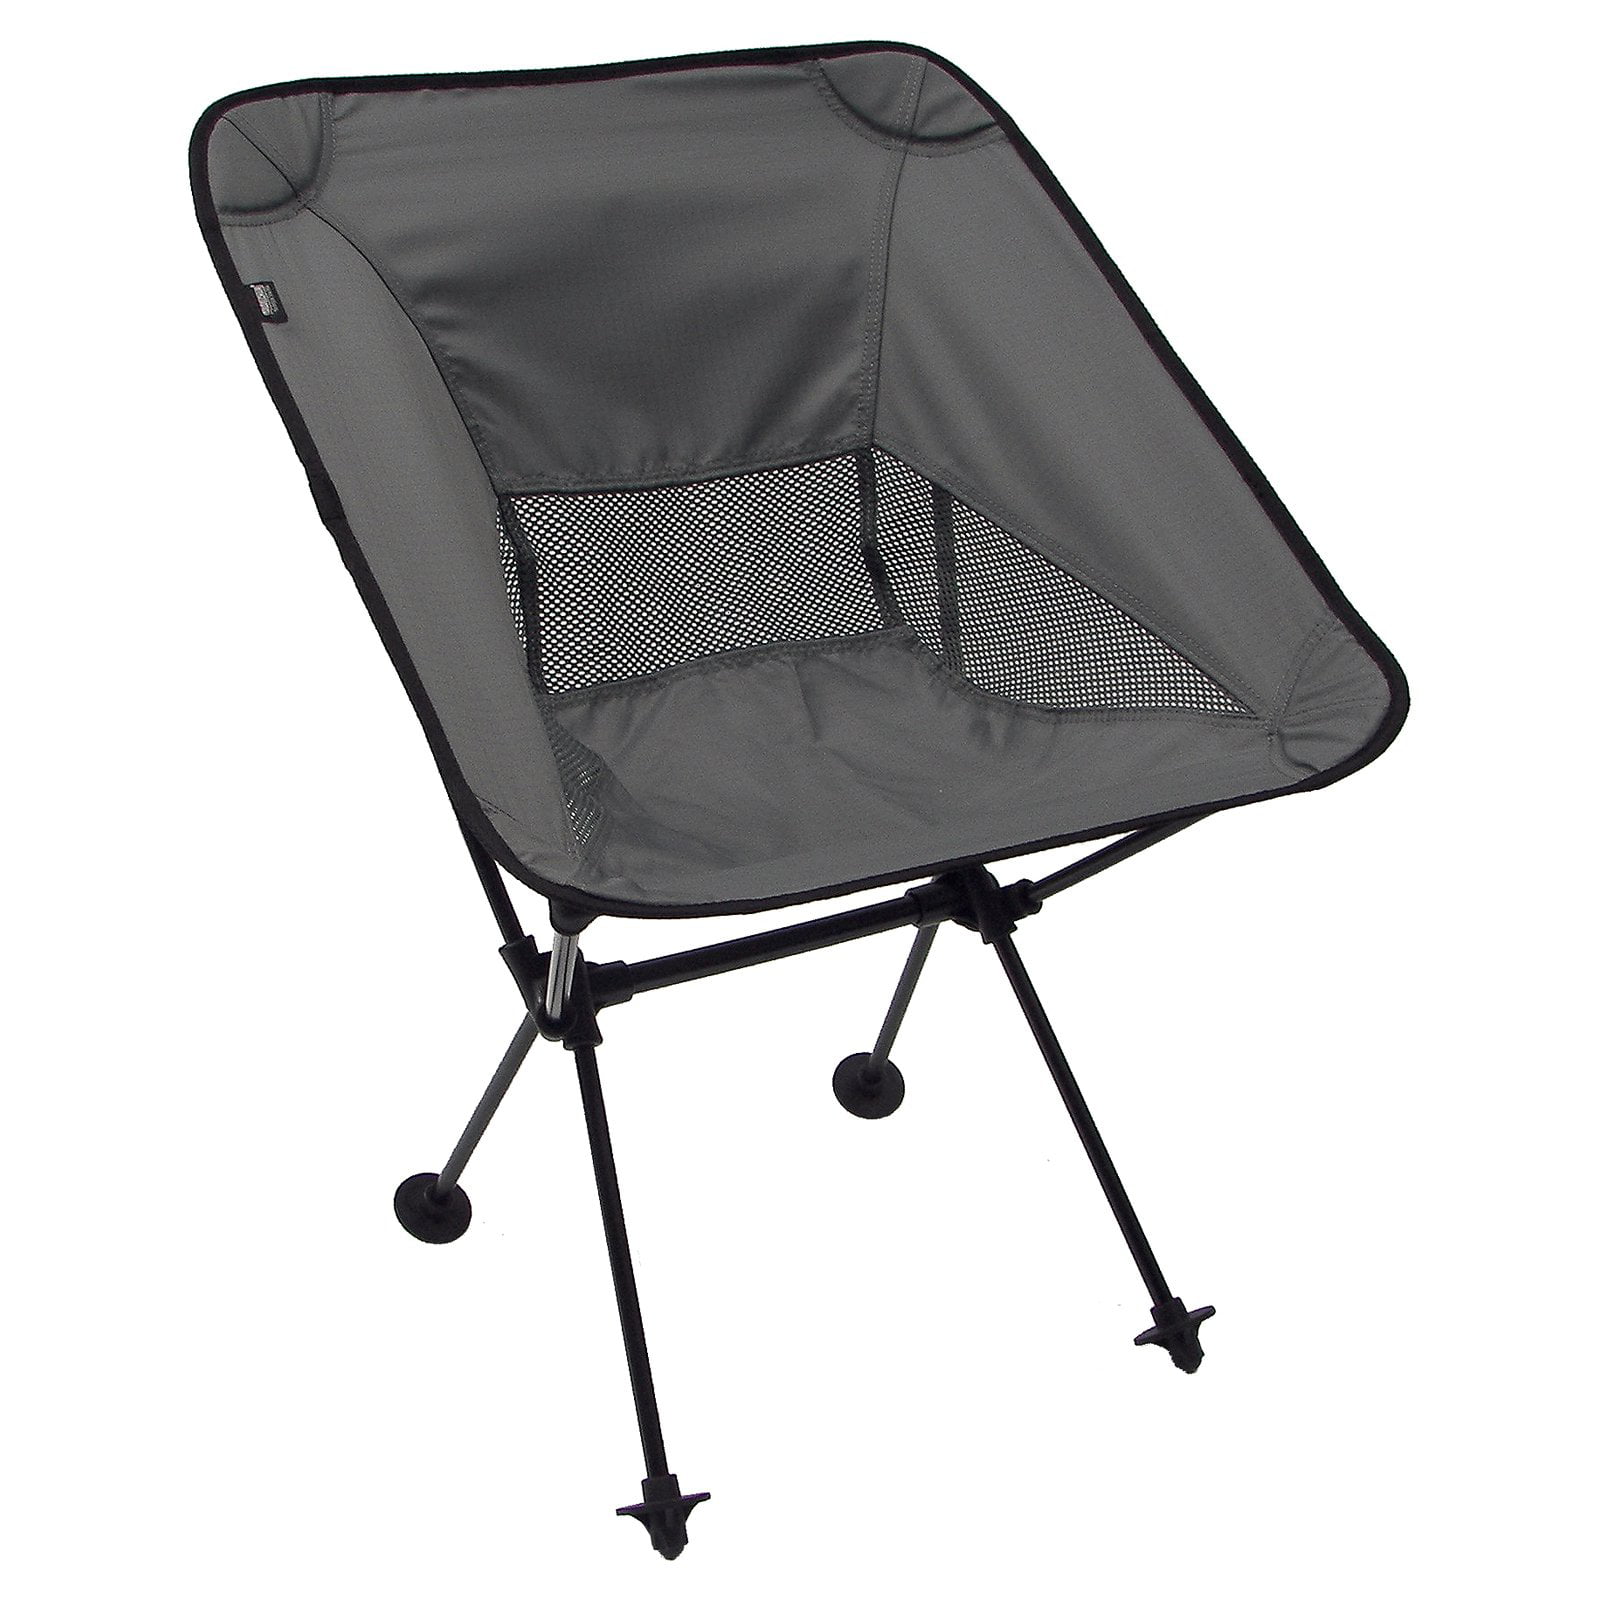 Wolftraders Lil'Wolf Lightweight Micro Collapsing Camp Chair for Kids and Adults 